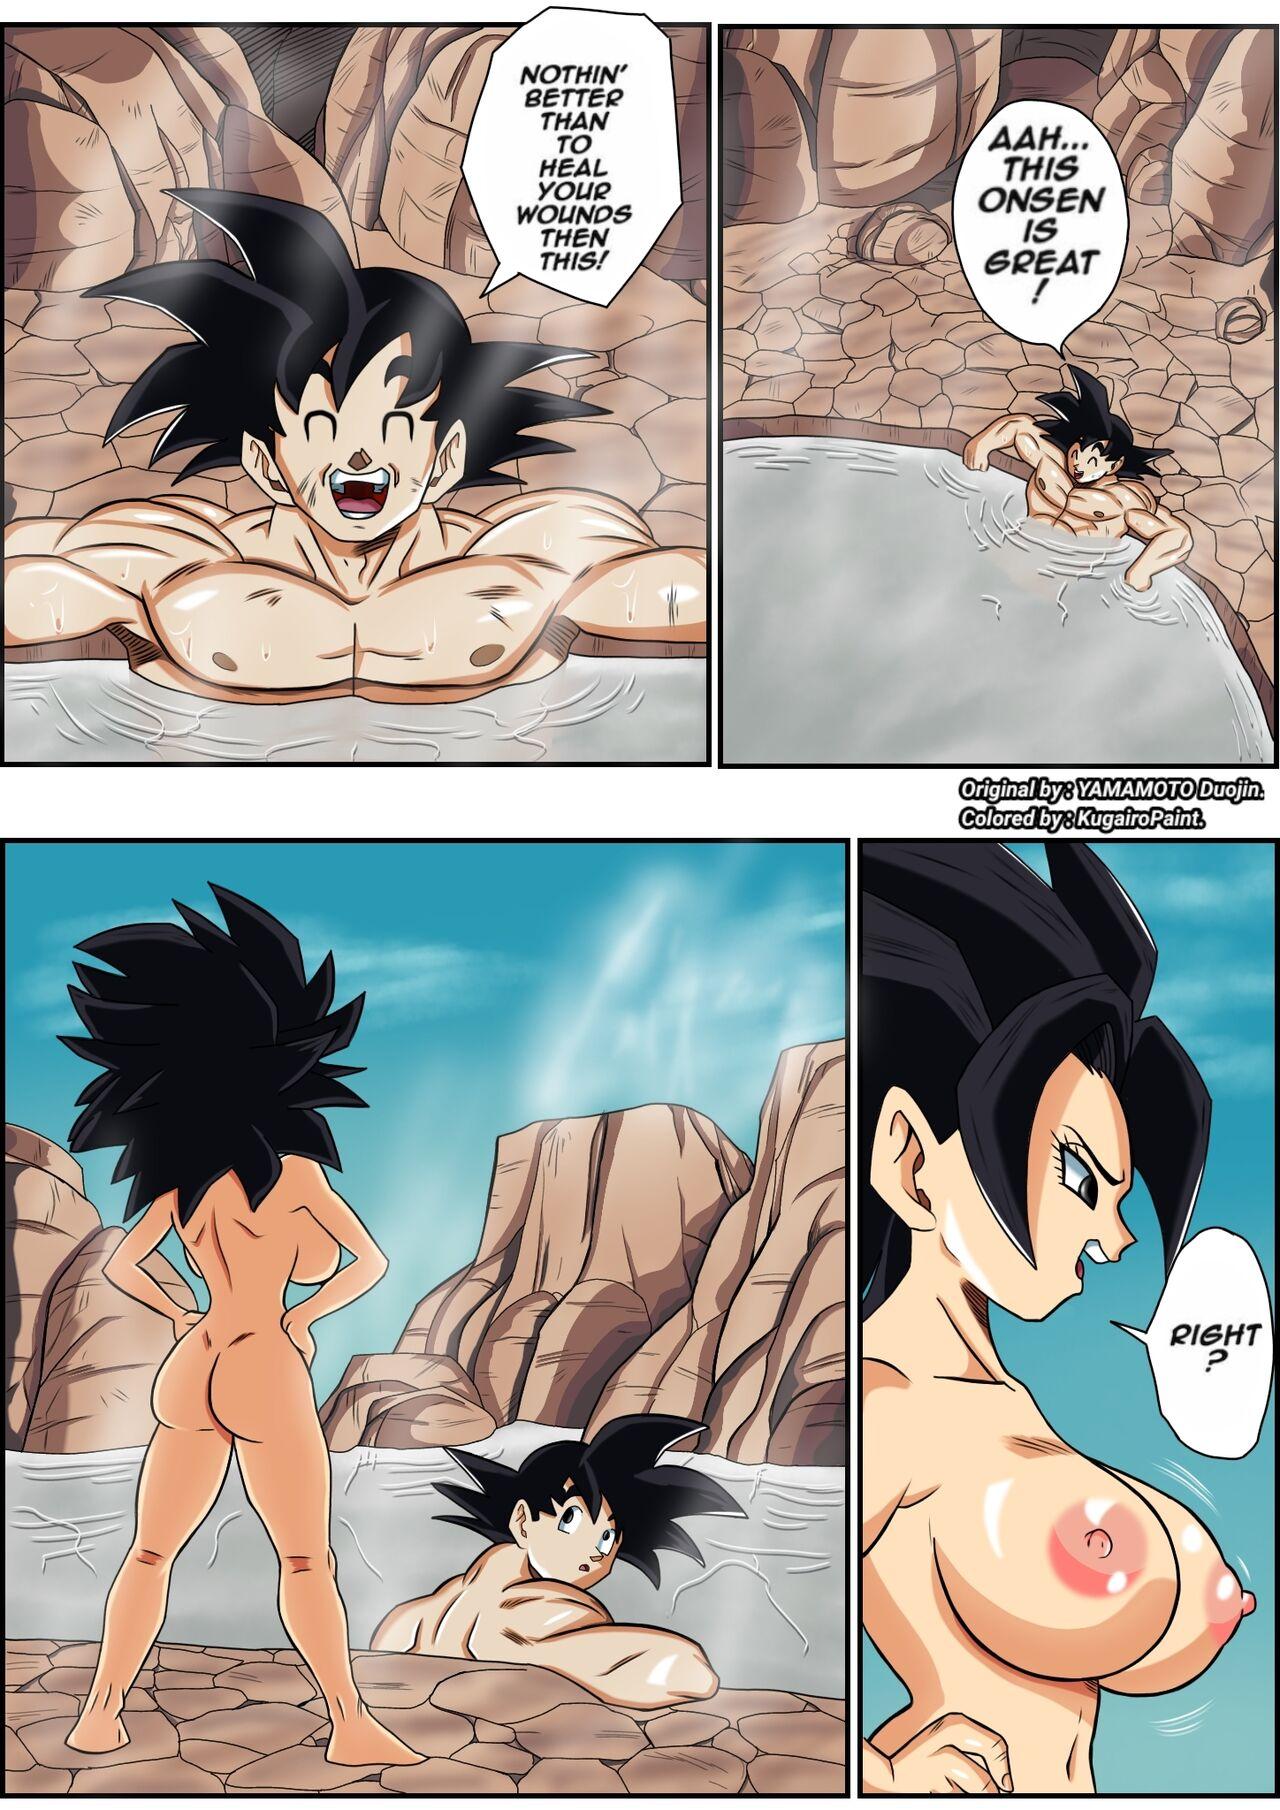 Full Movie Fight in the 6th Universe!! - Dragon ball super Wrestling - Page 7